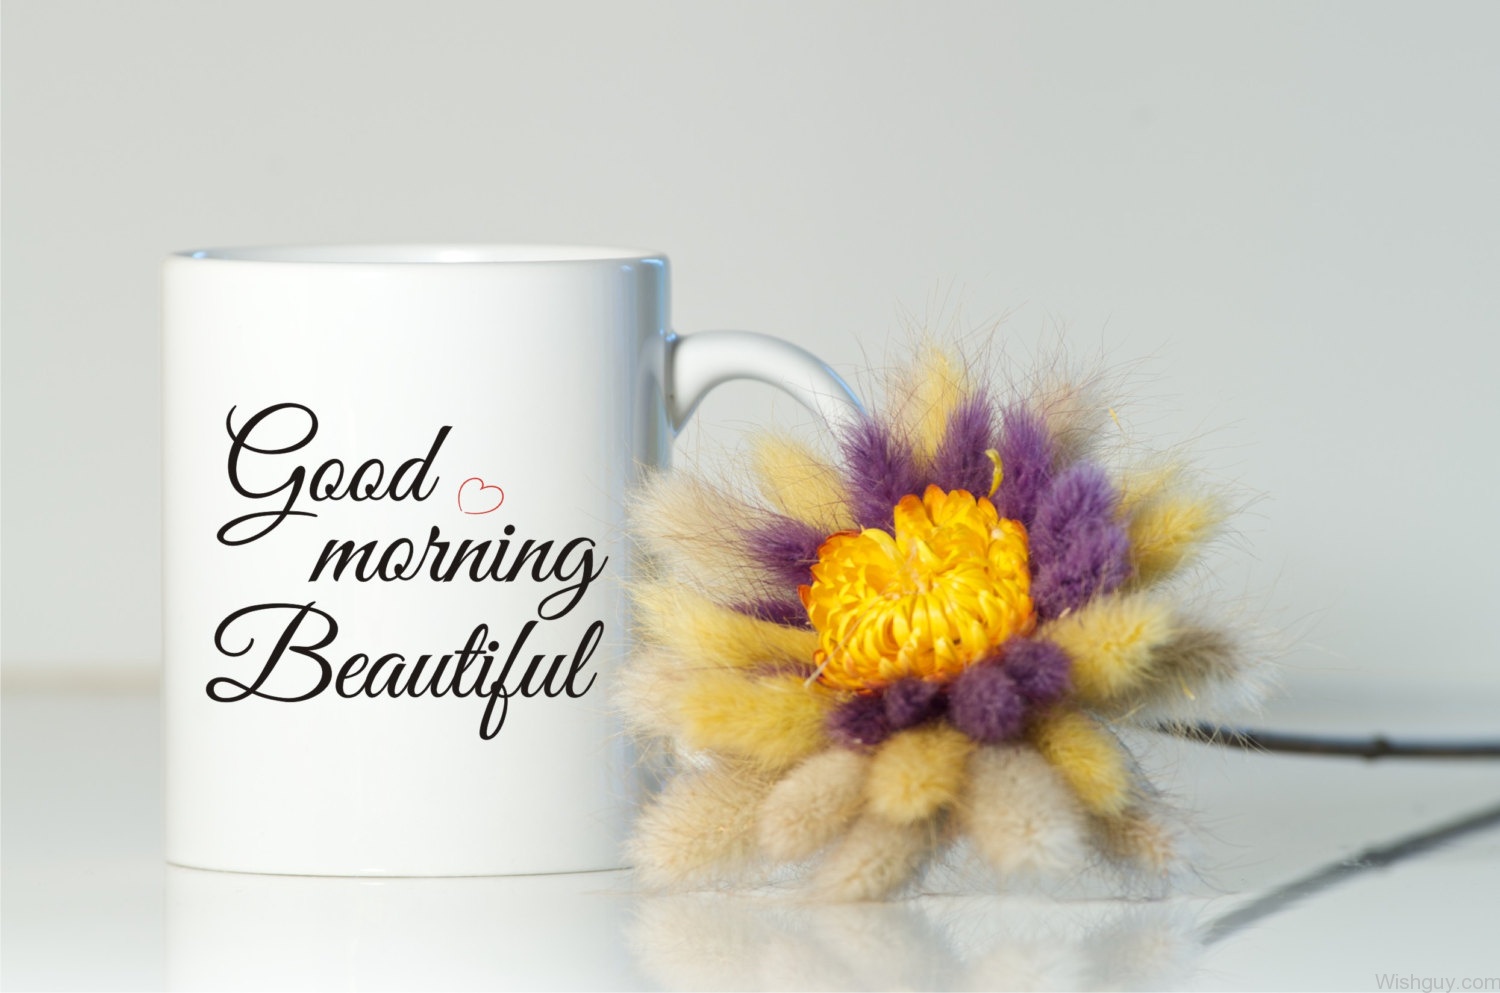 Good Morning Wishes For GirlFriend - Wishes, Greetings ...